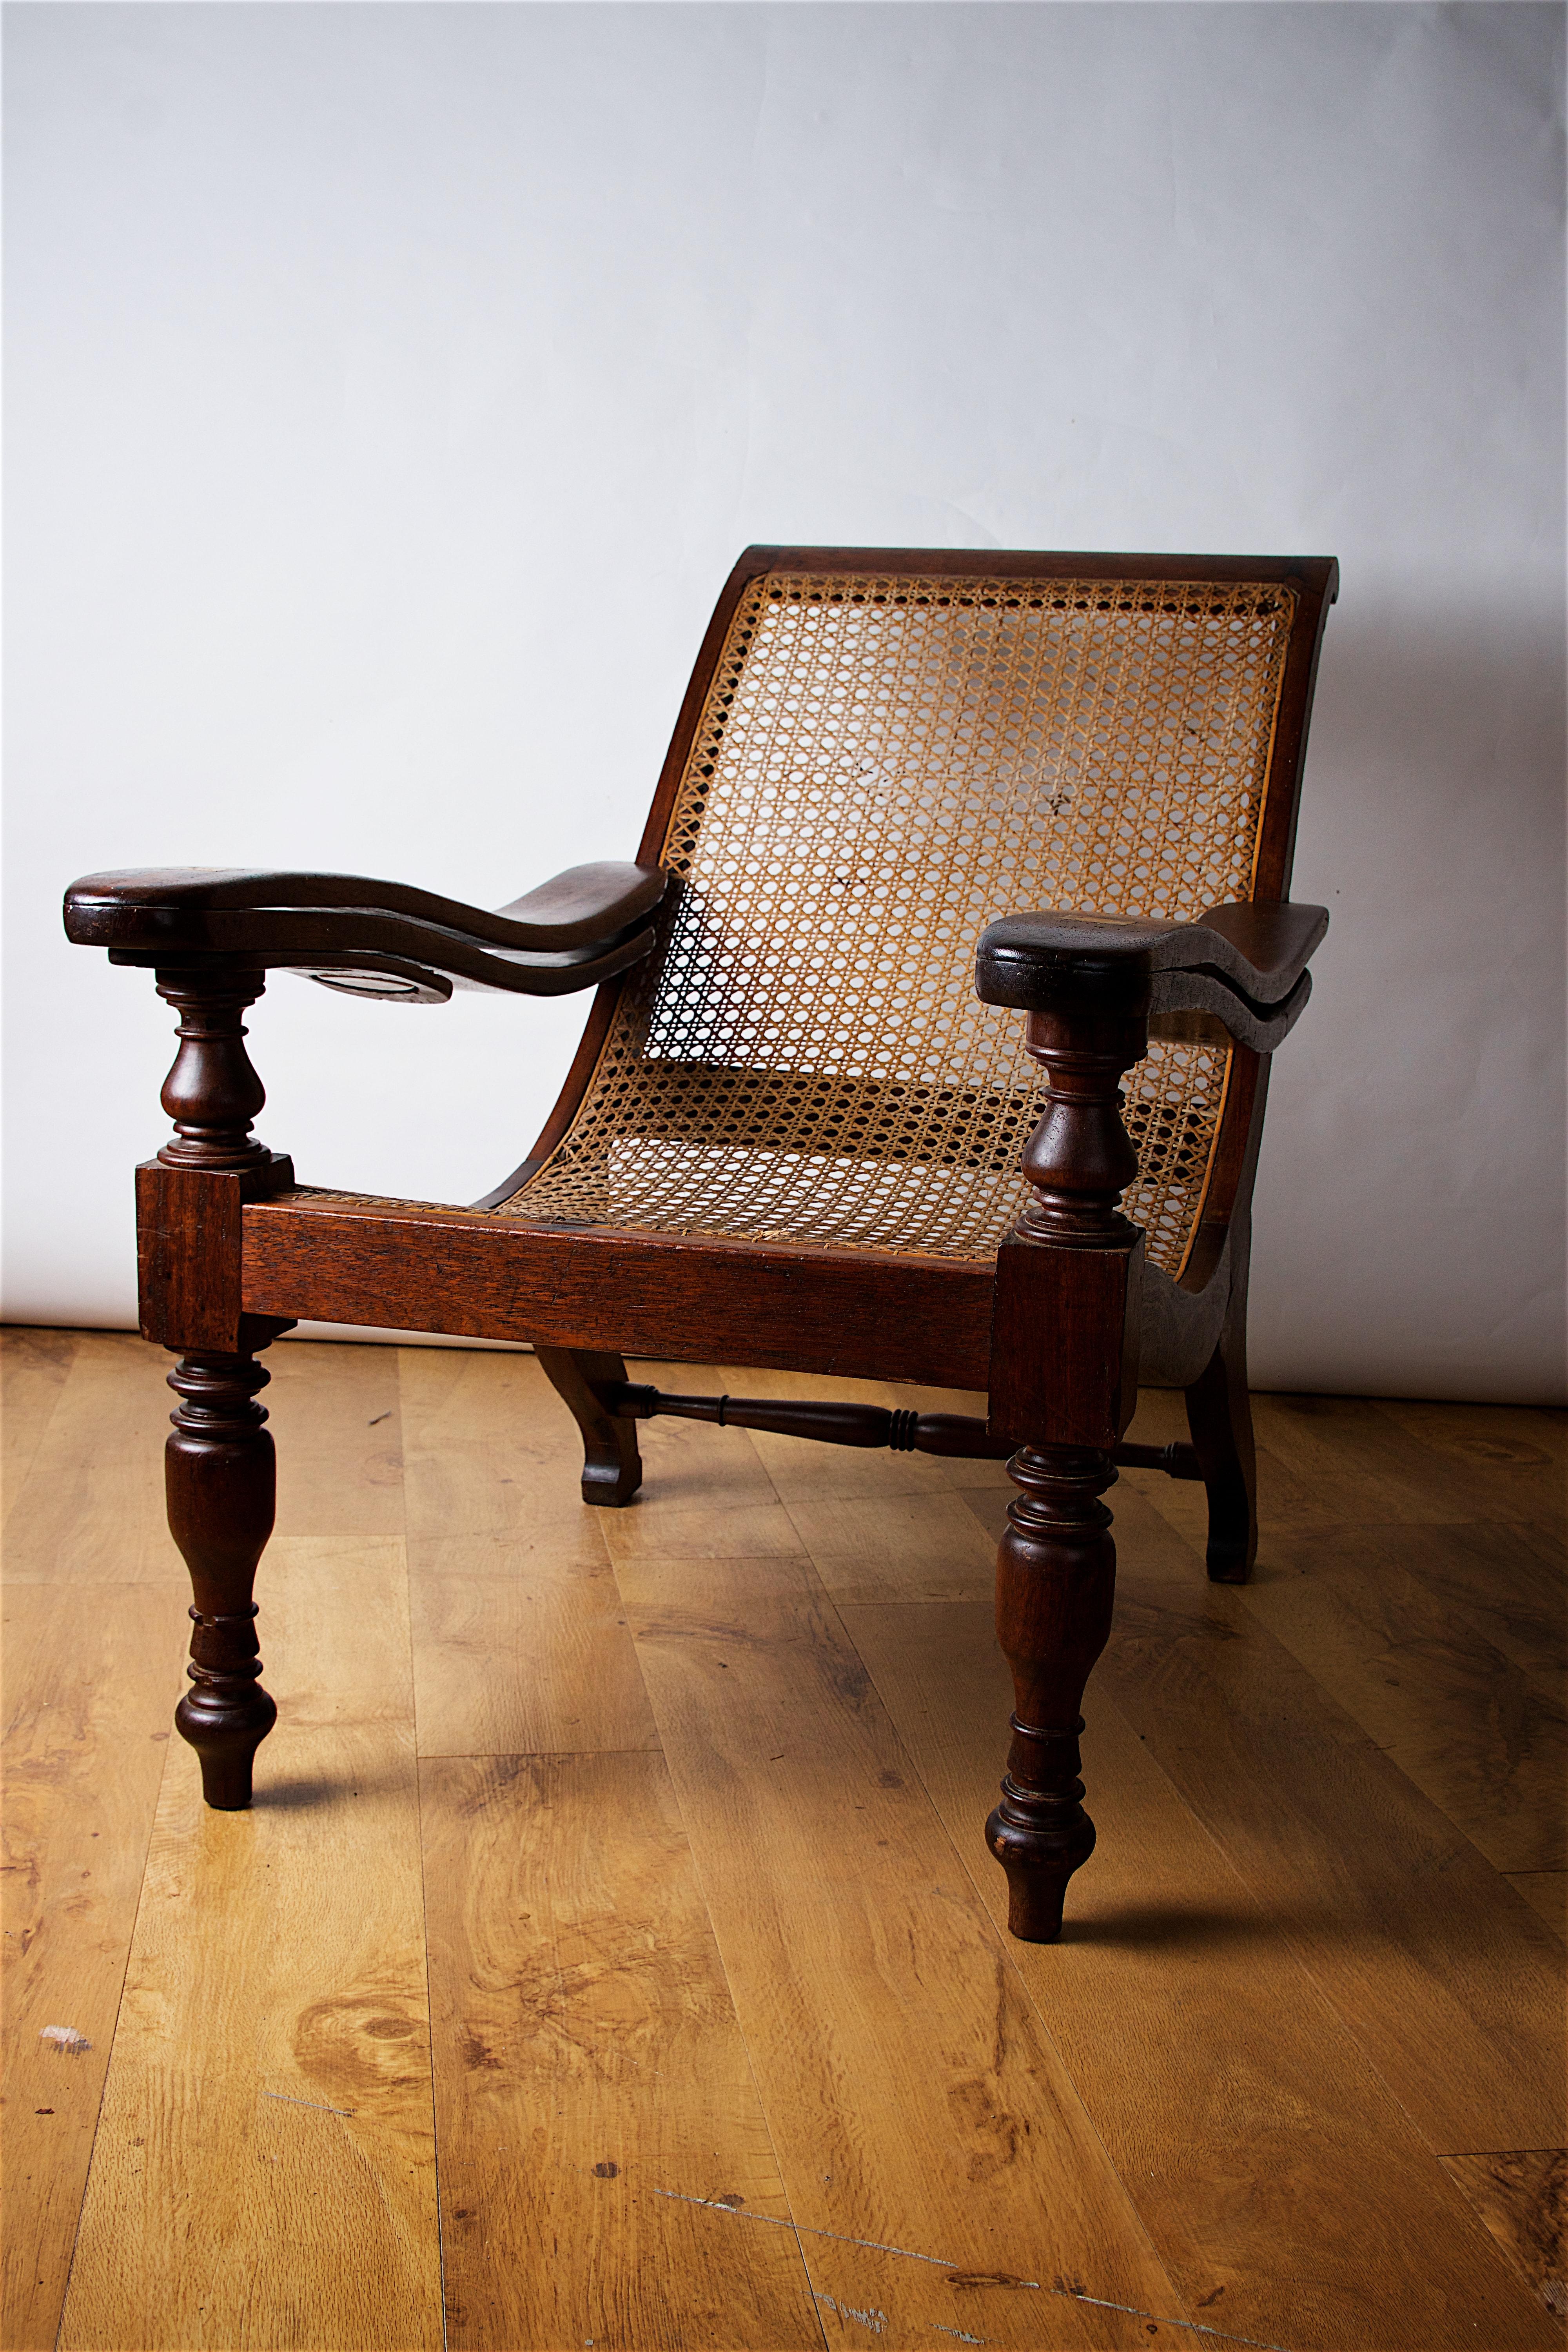 Victorian Teak and Rattan Plantation Steamer Chair In Good Condition For Sale In Stratford upon Avon, GB